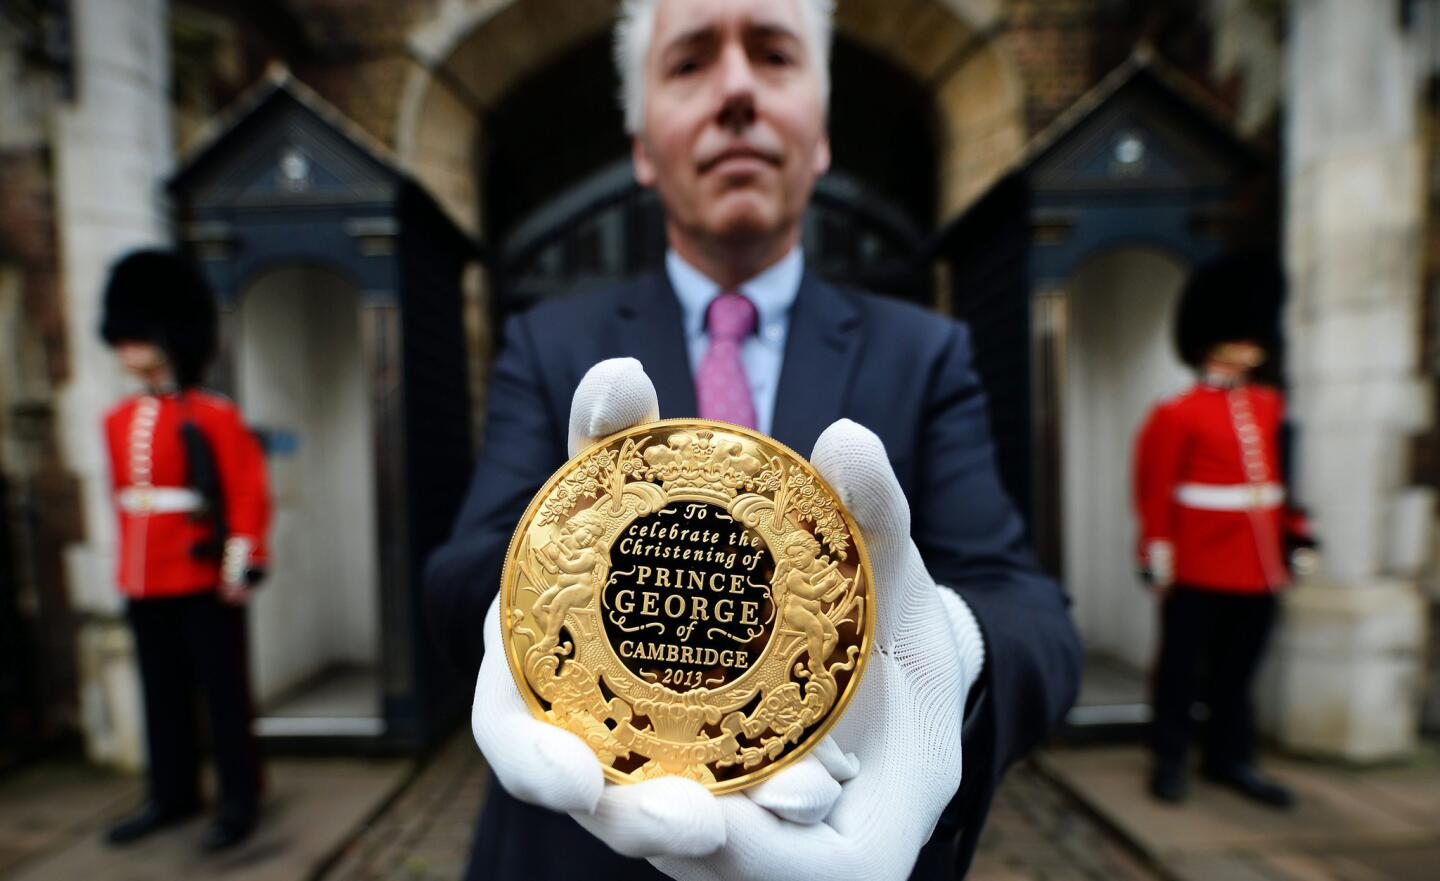 Gordon Summer, Chief engraver for the Royal Mint, holds a commemorative gold coin to celebrate the christening of Prince George outside St James' Palace in London.